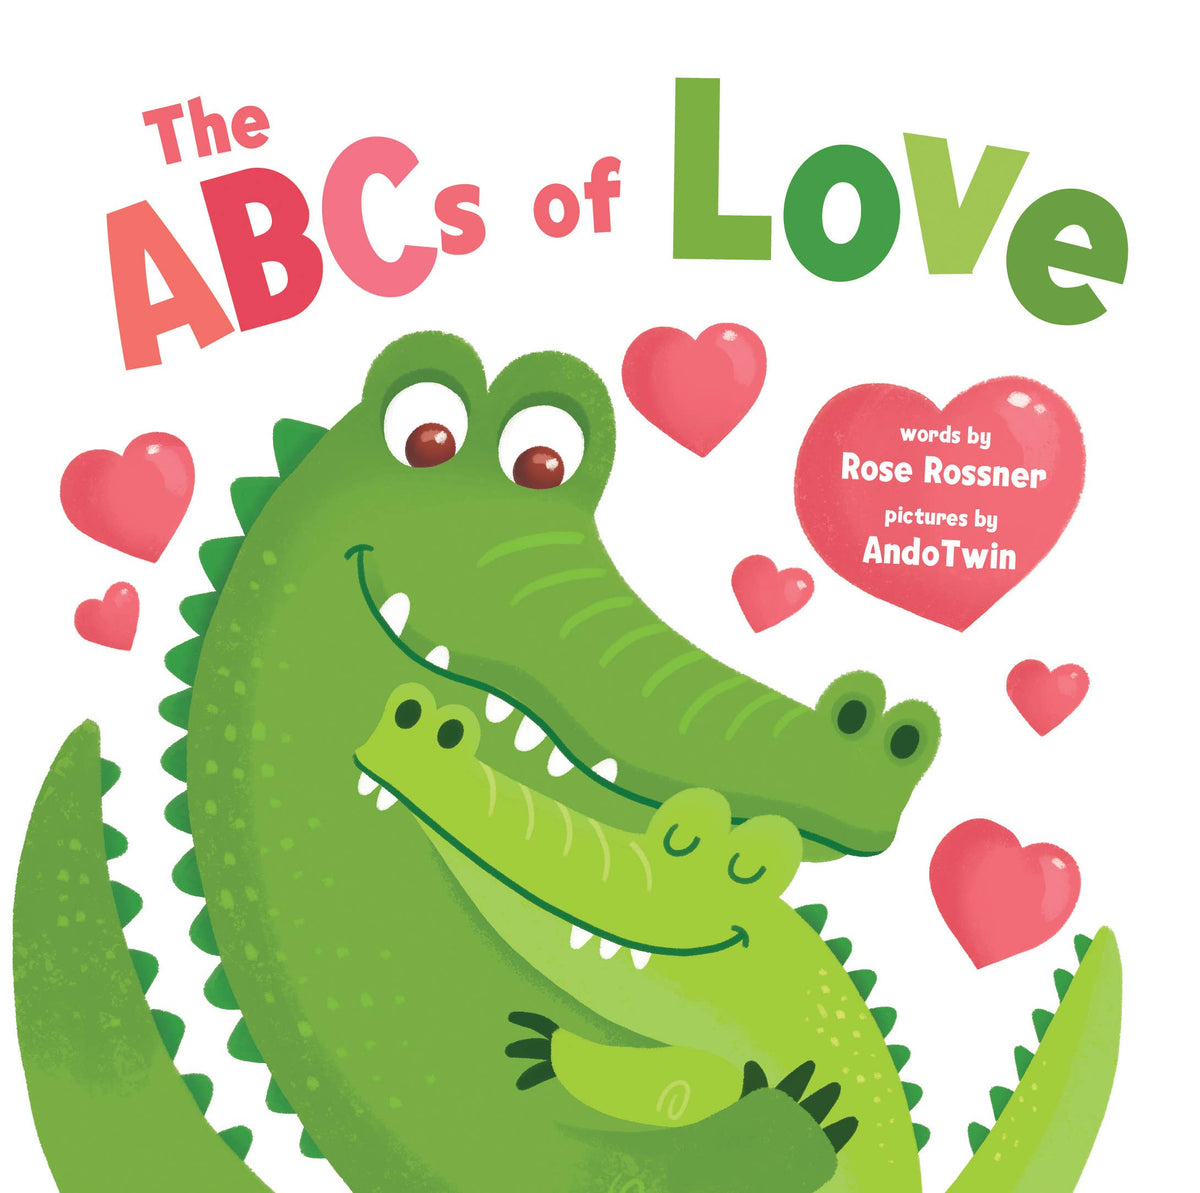 The ABC's of LOVE